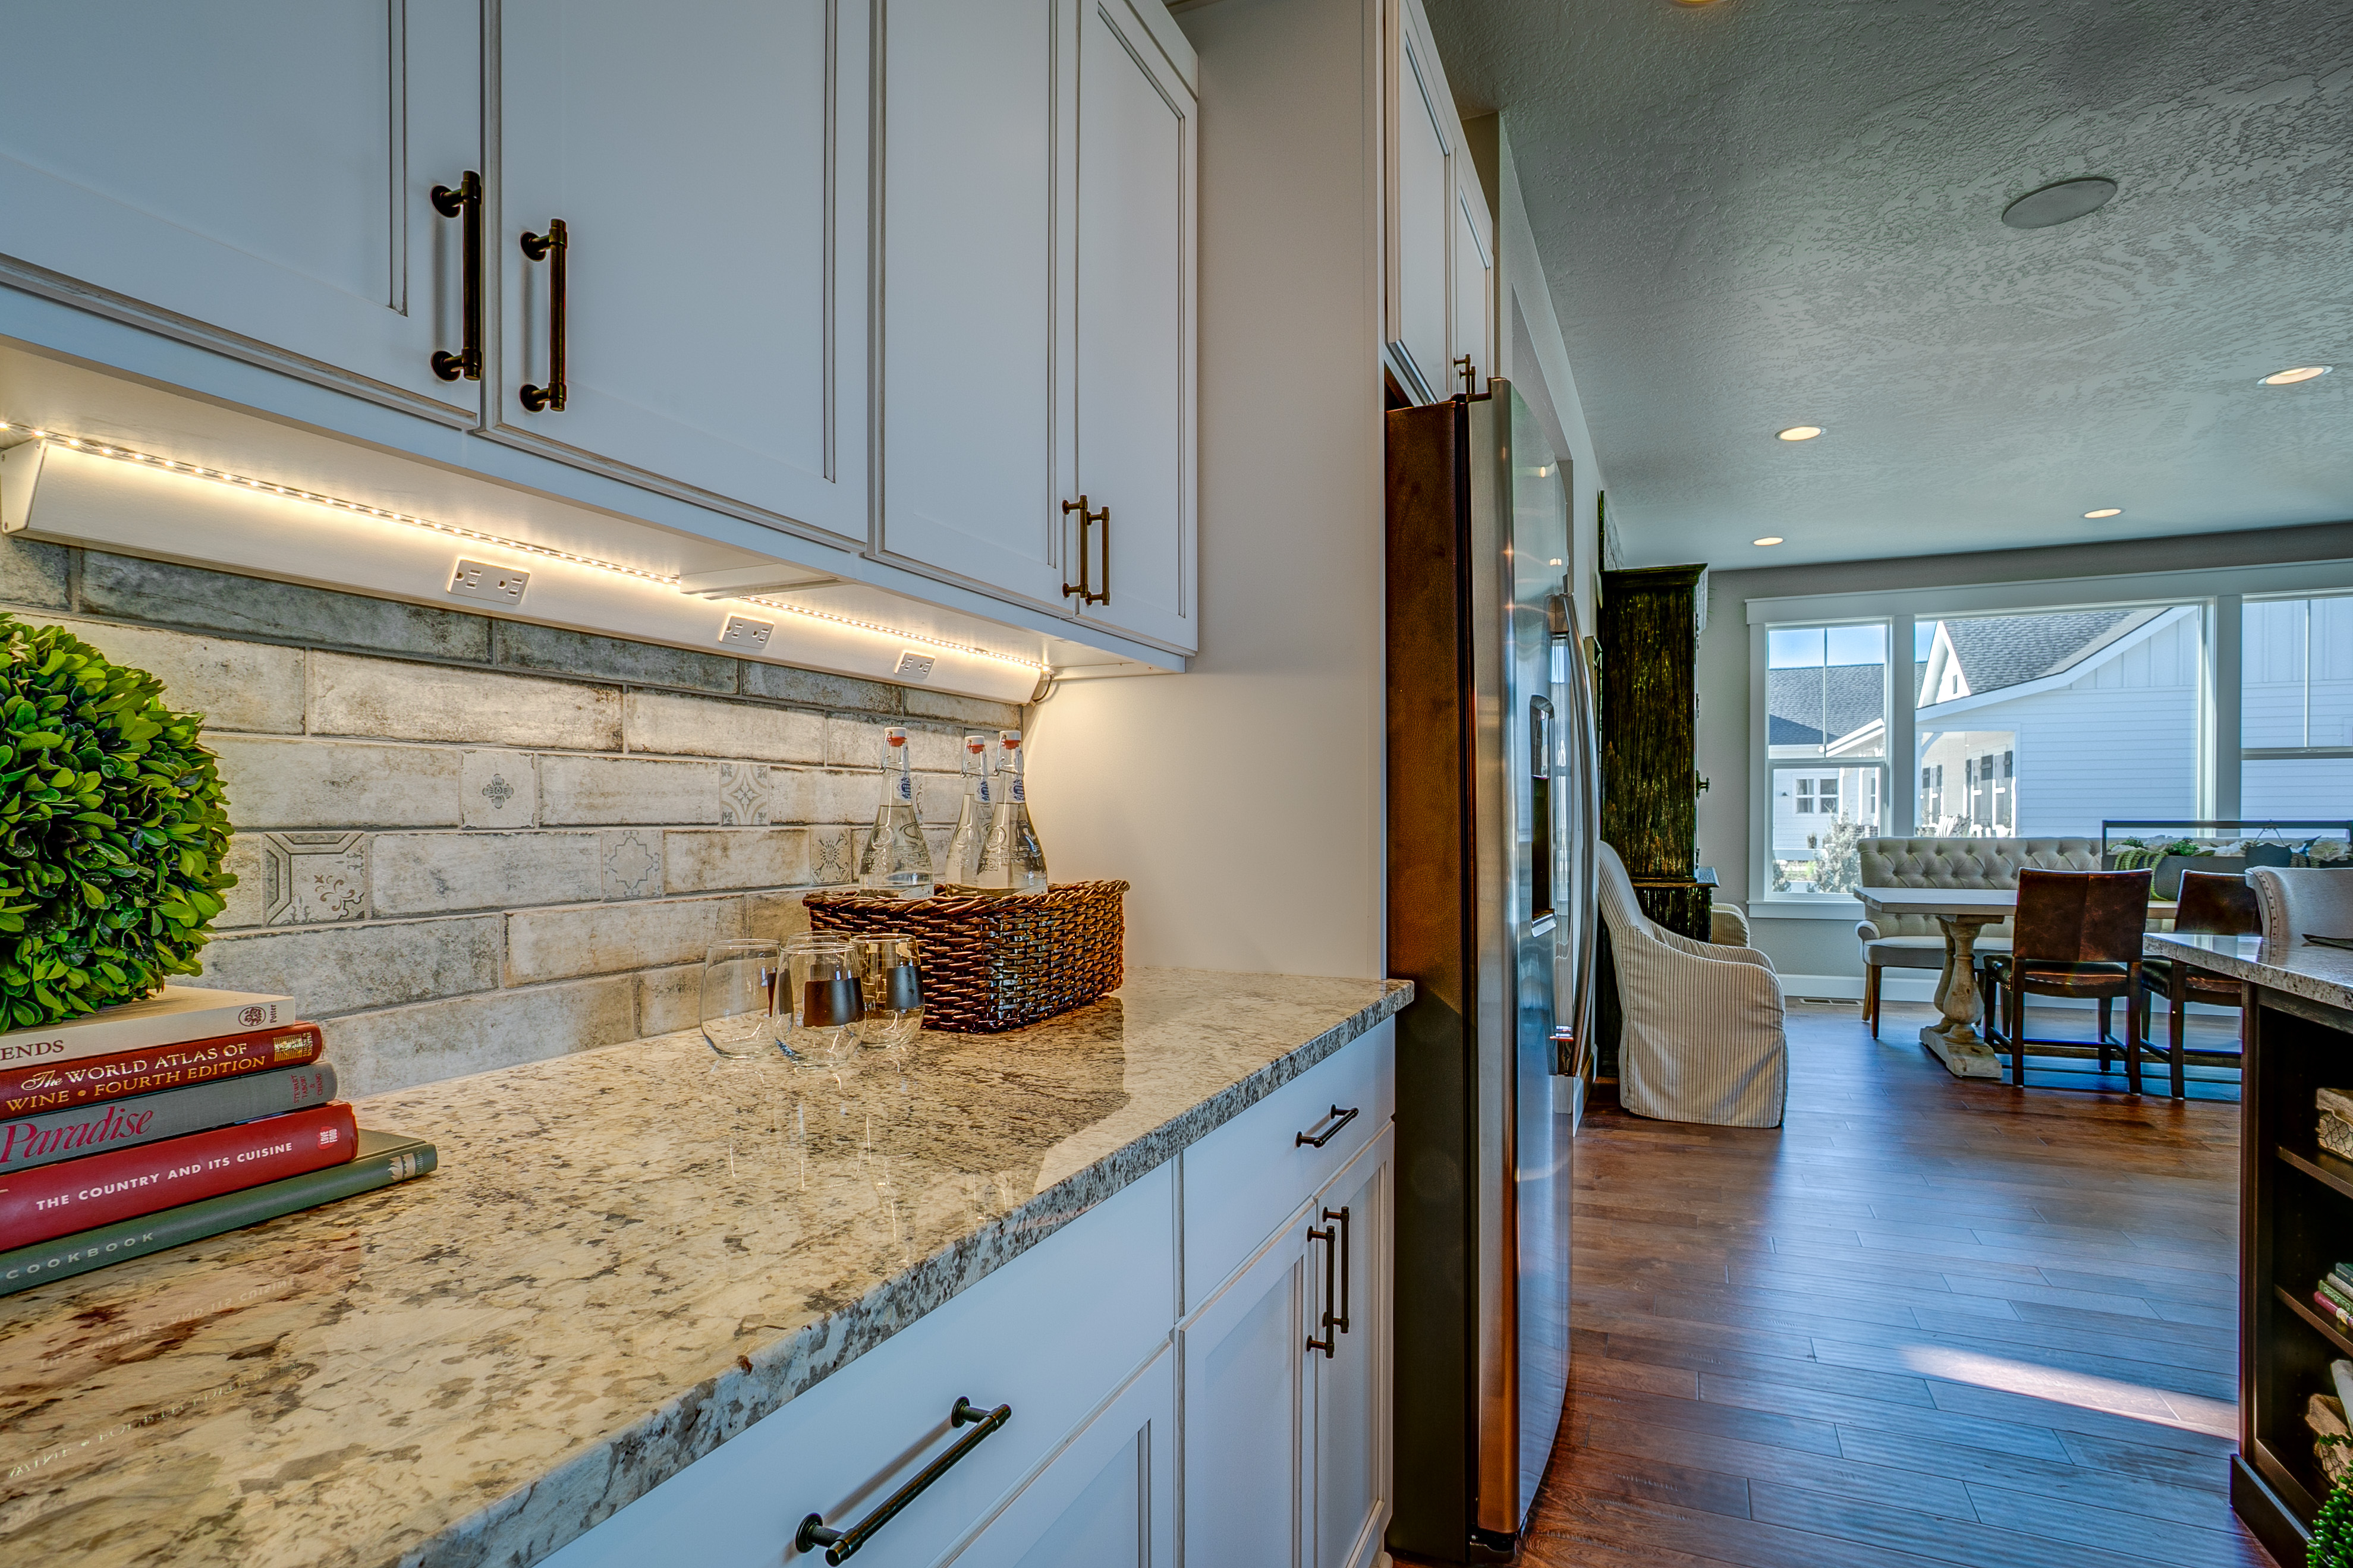 Kitchen backsplash with granite counters and white cabinets.